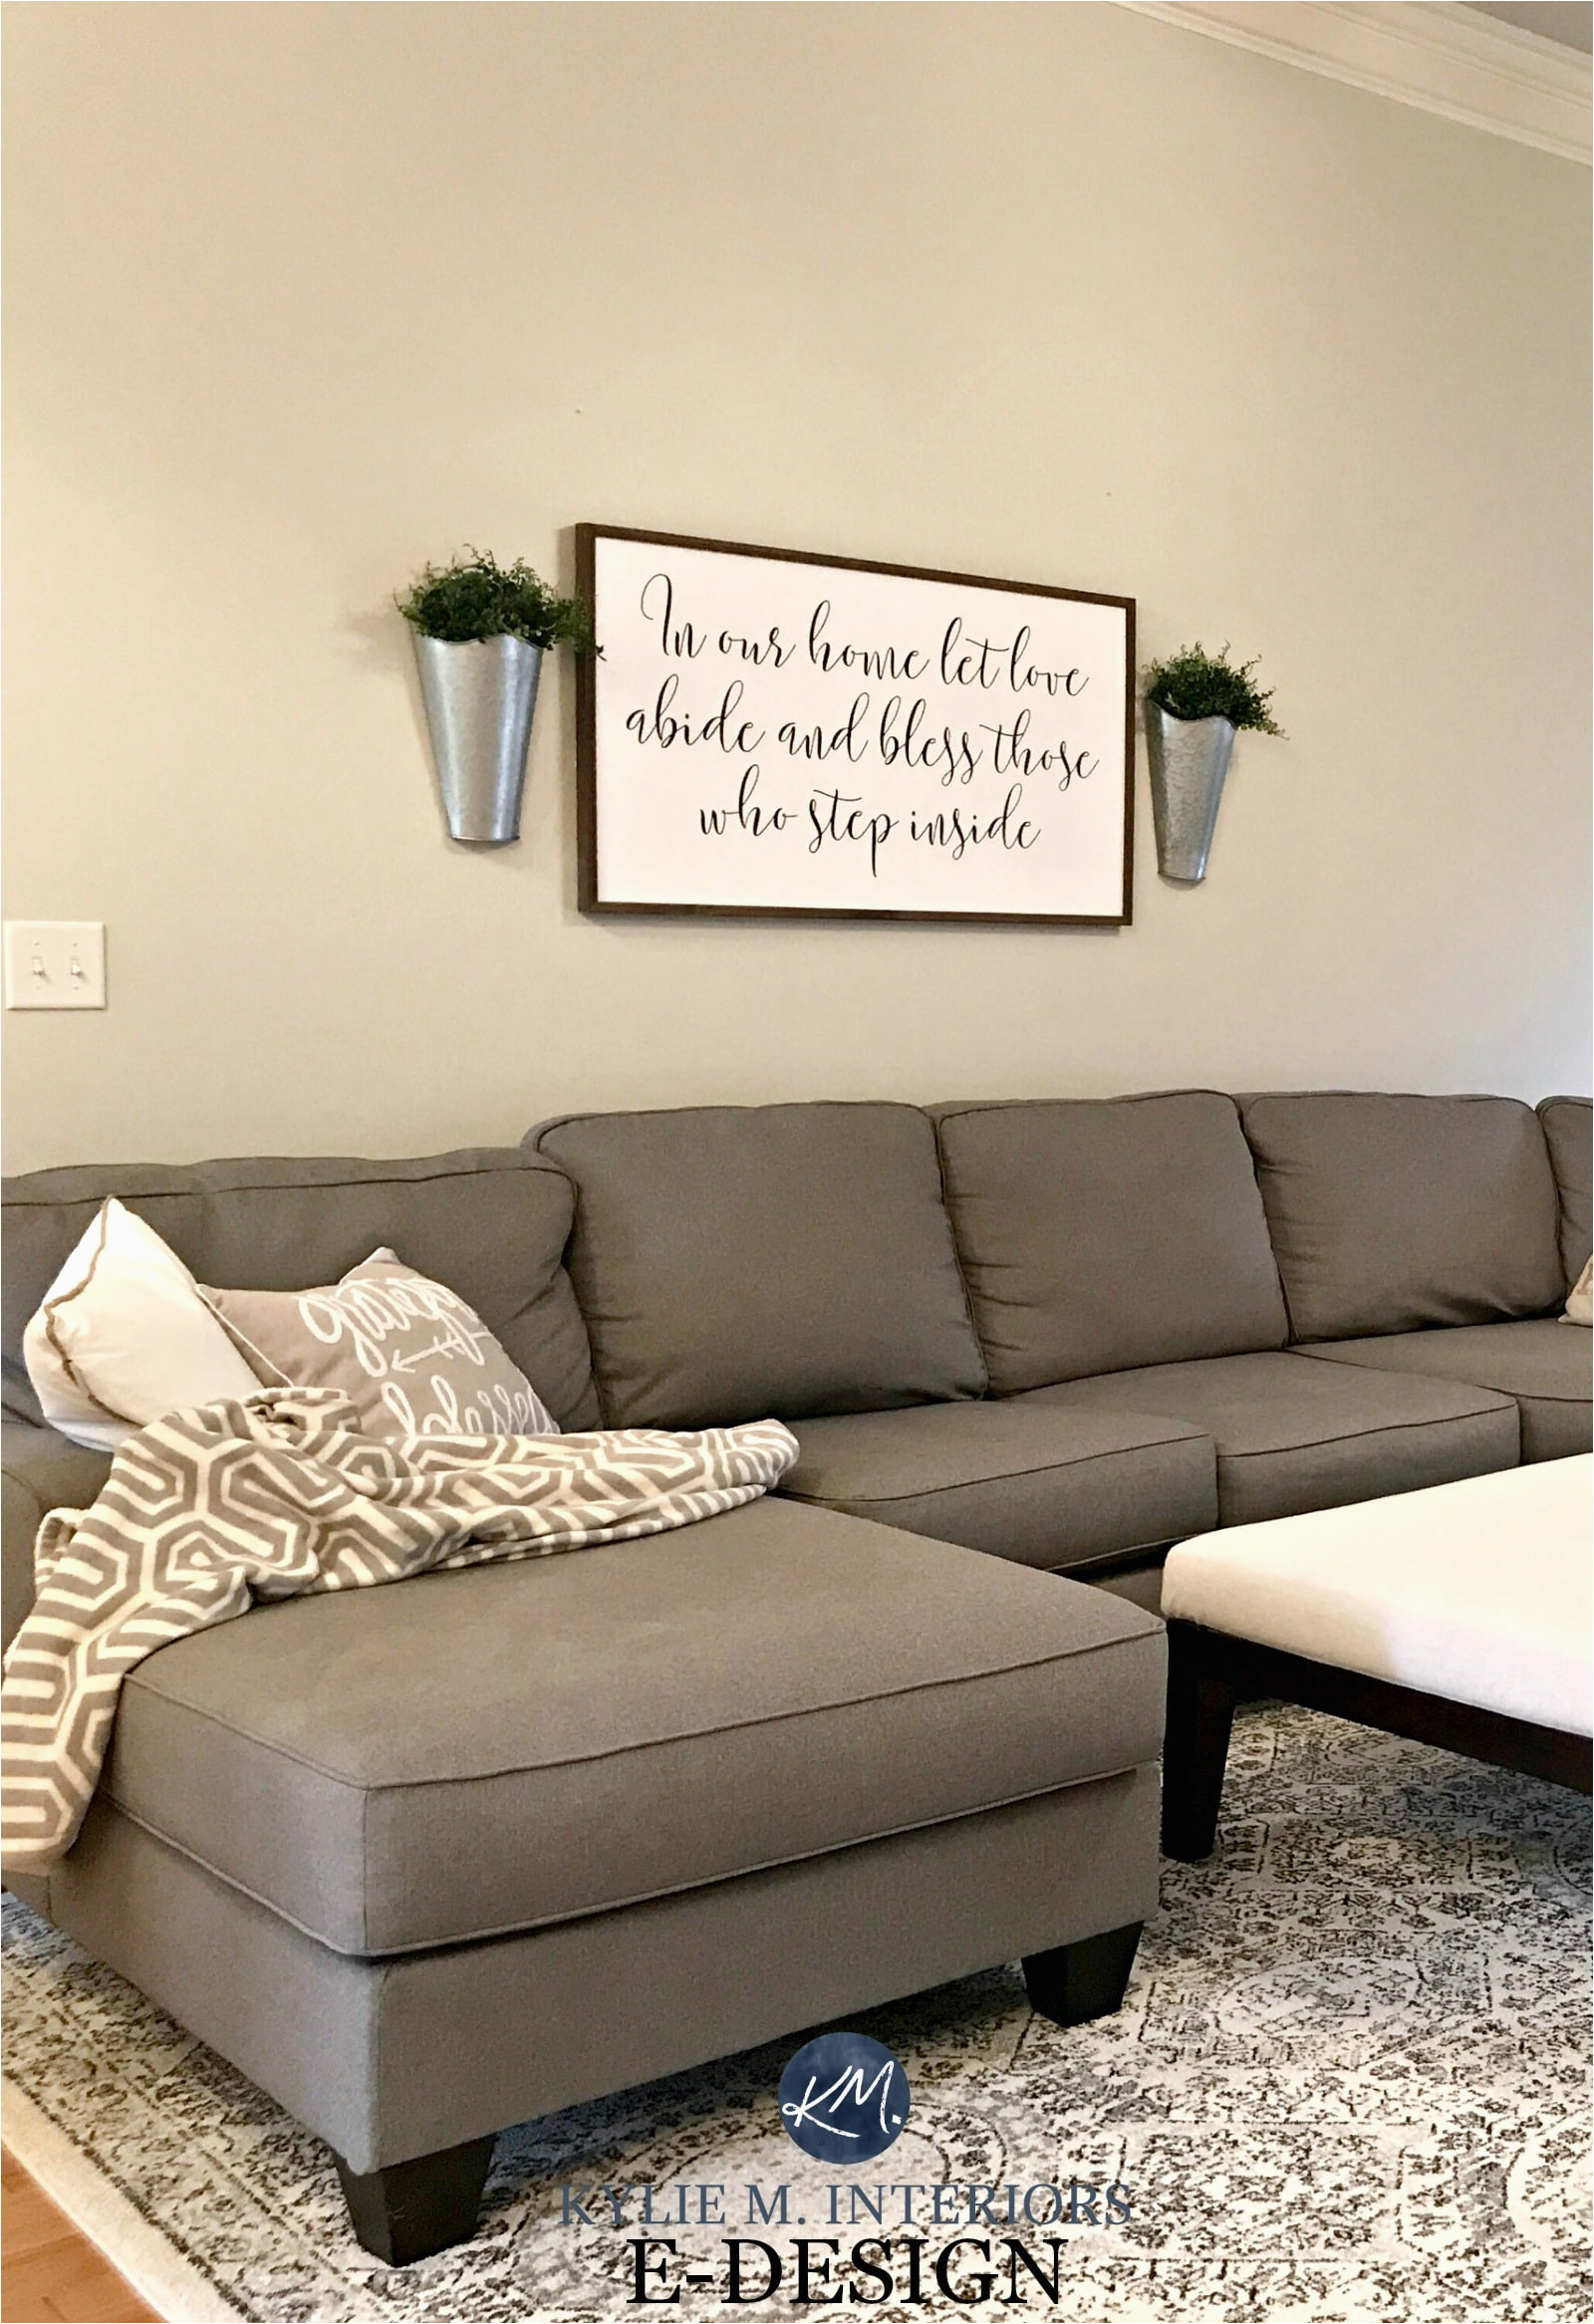 sherwin williams agreeable gray in living room gray sectional couch area rug kylie m e design and online color consulting